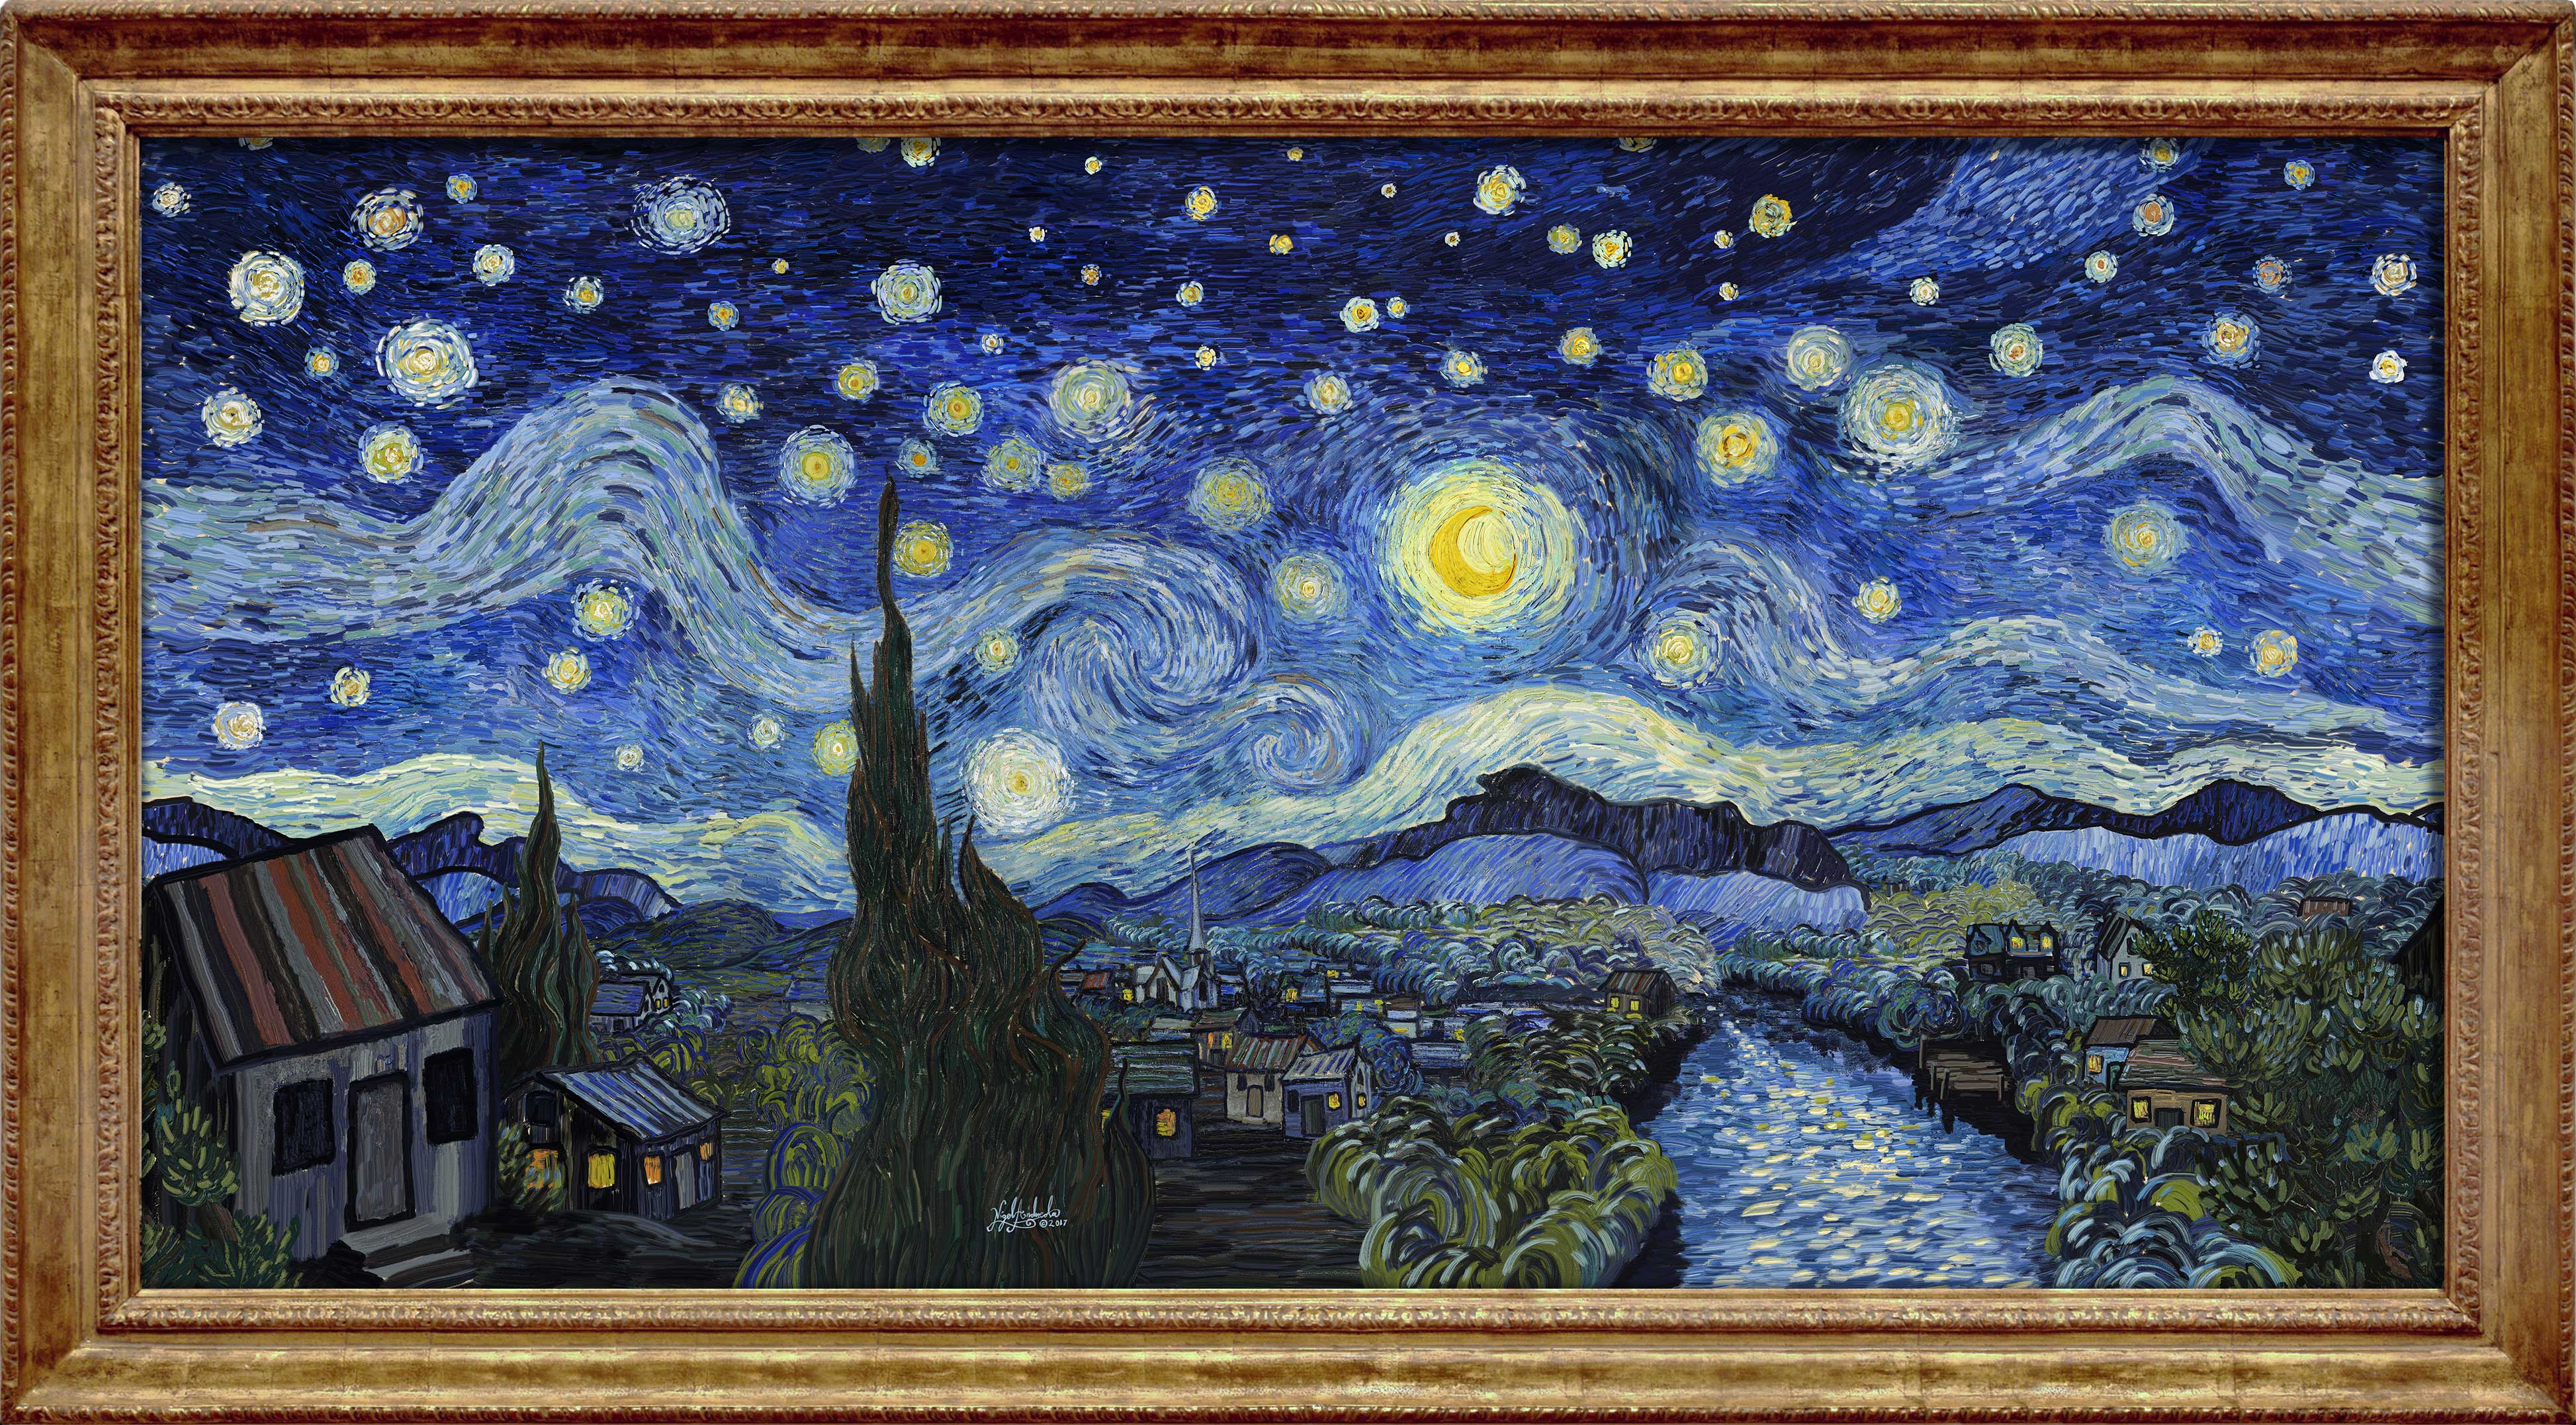 Van Gogh’s Starry Night has captured the imagination of countless millions. It has become one of the most popular fine art pieces of our generation.
Here at Starry Night Media Van Gogh and his bold colorful paintings are the inspiration behind our marketing approach. We planned to use his famous painting as our website background. Its square aspect did not nicely fill the displays of most contemporary devices. We employed artist Nigel Andreola to match the impasto technique used by Van Gogh and expand his work in a way no other has yet equaled.